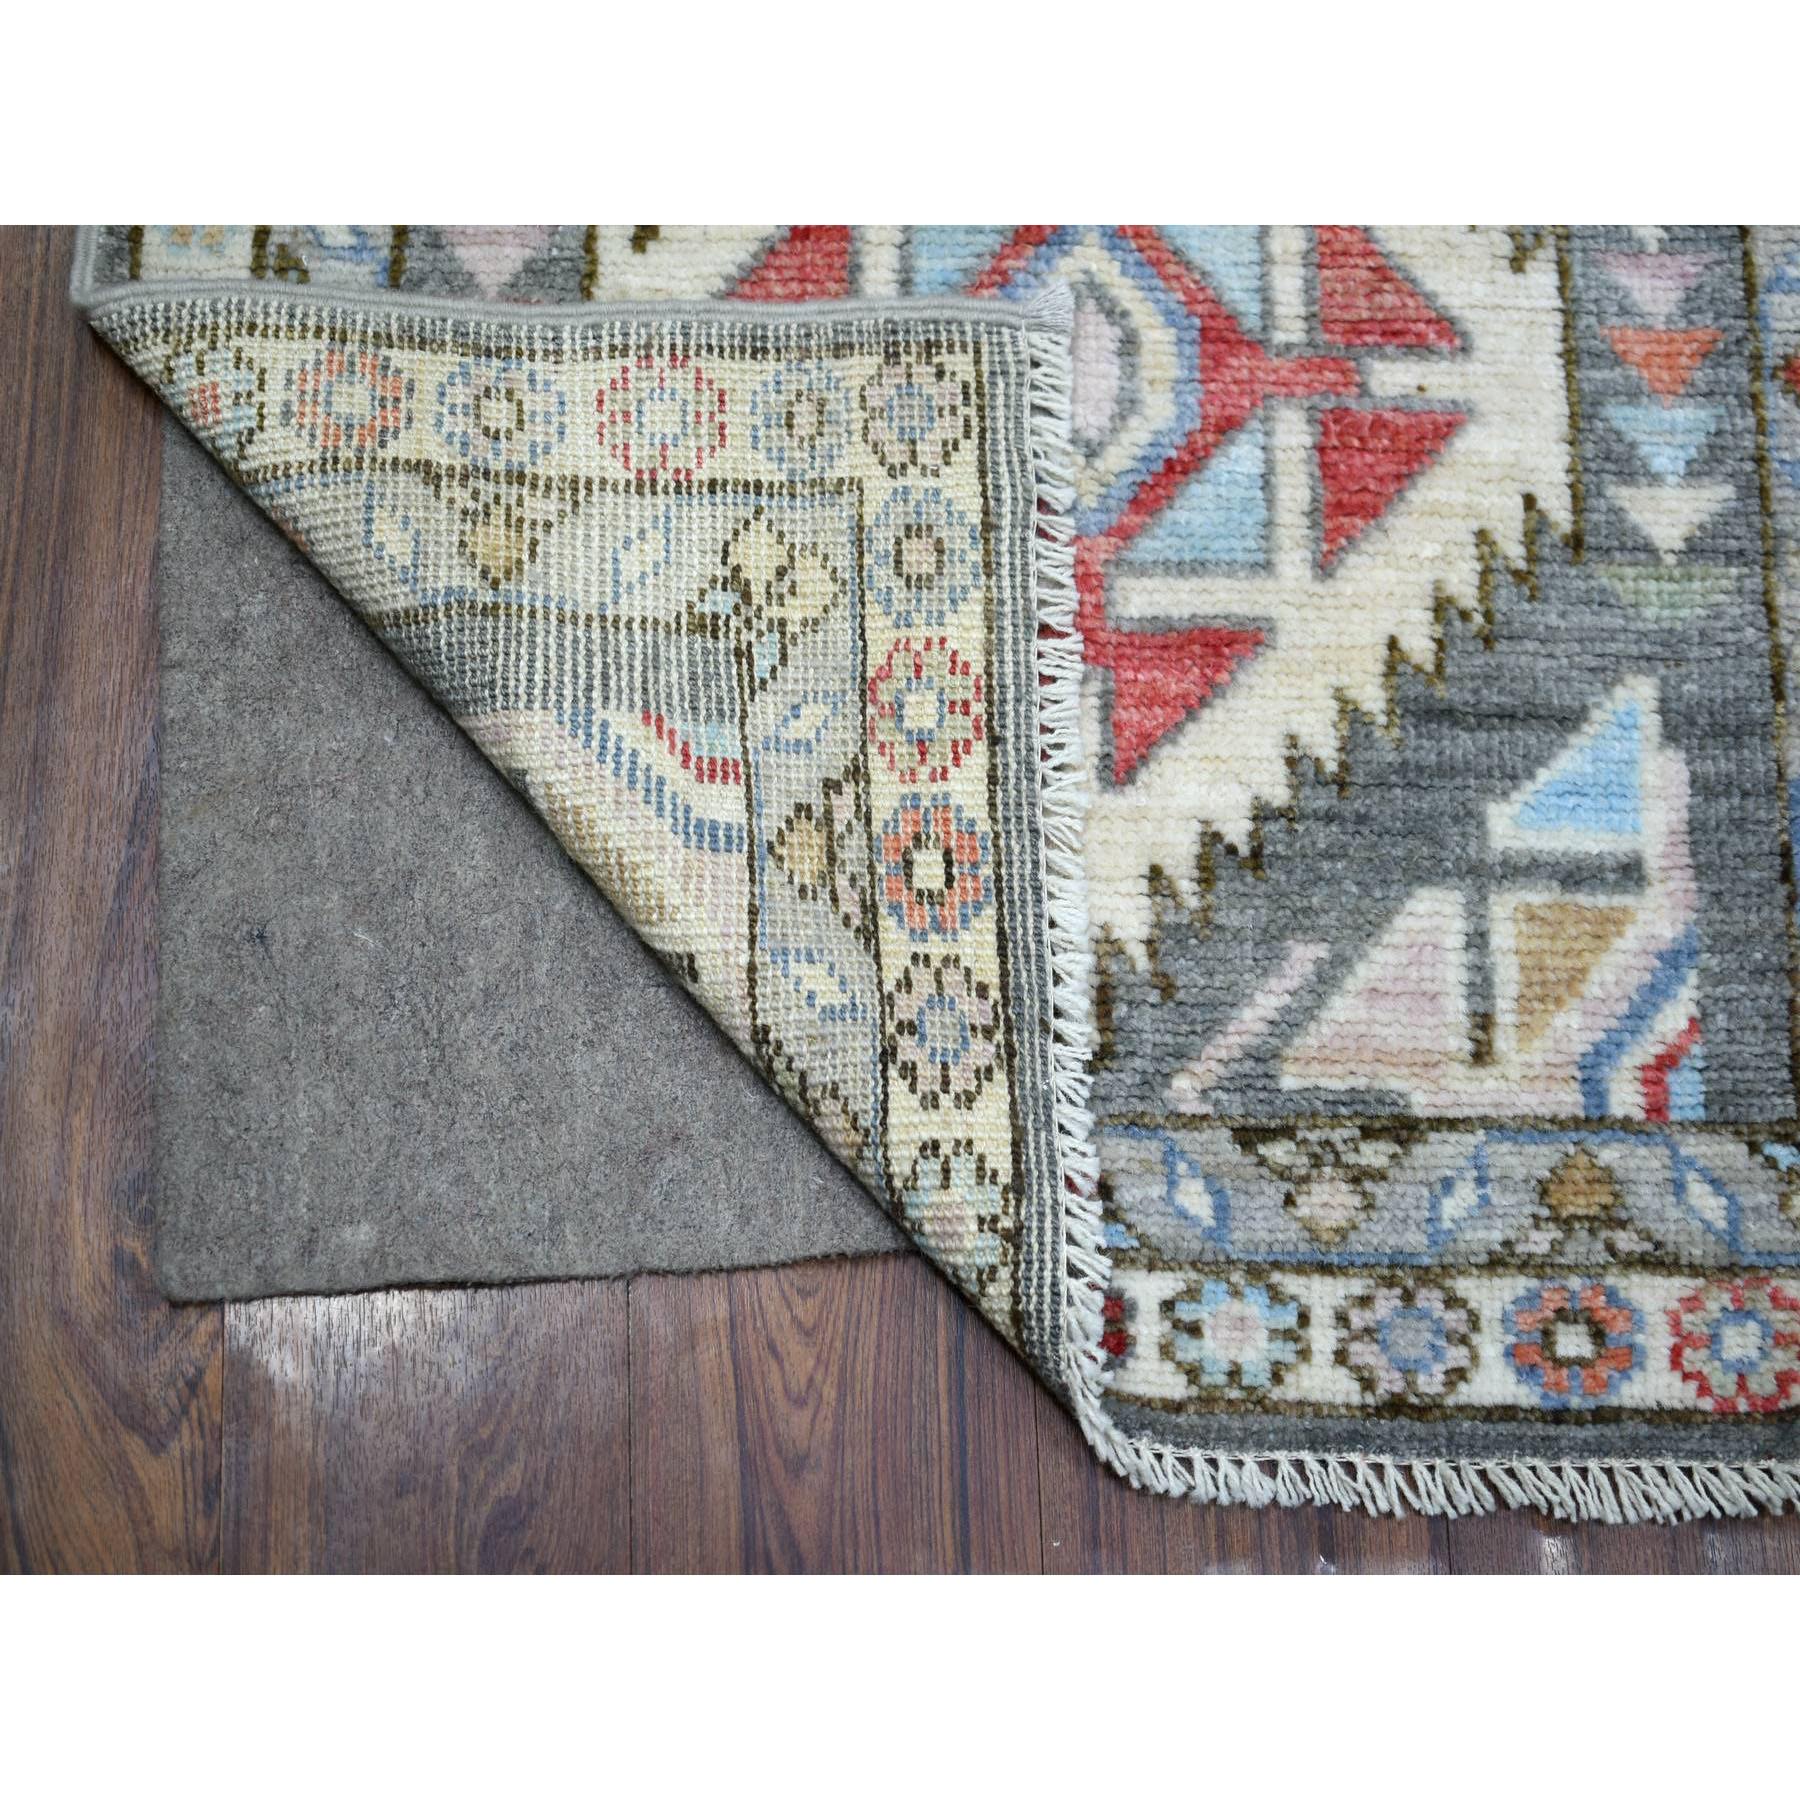 2'7"x10' Charcoal Gray, Hand Woven, Anatolian Village Inspired Oushak, Pure Wool, Runner Oriental Rug 